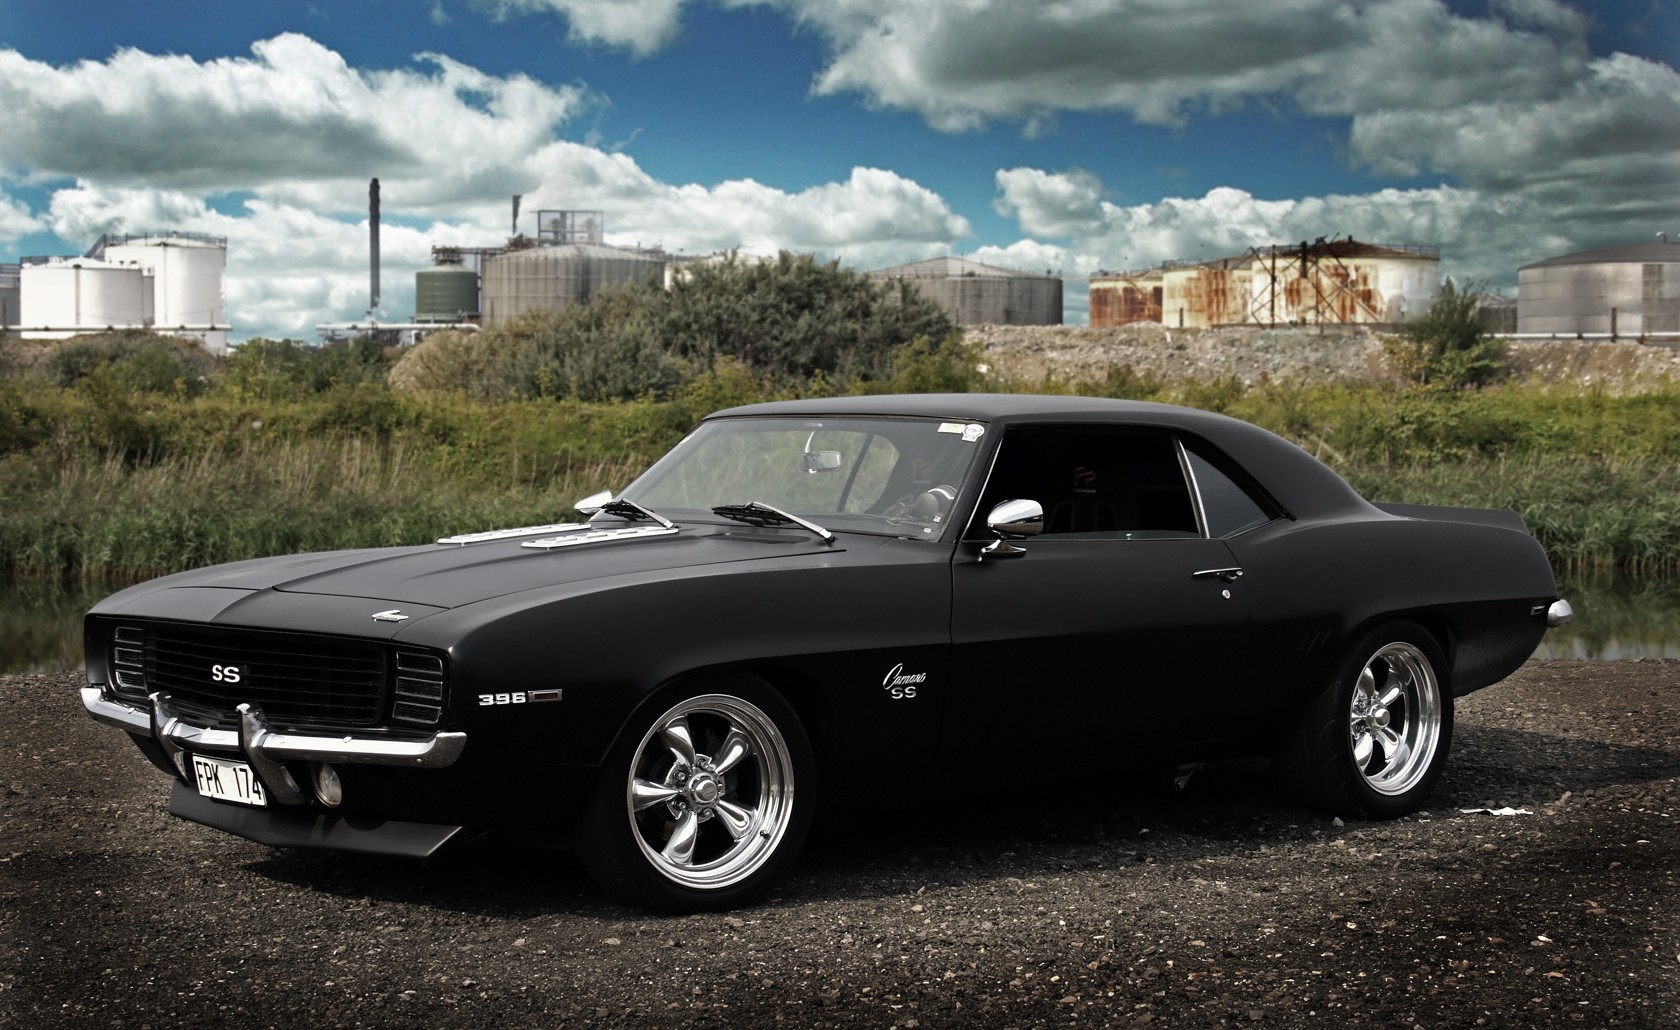 General 1680x1030 car Chevrolet Camaro SS muscle cars black cars numbers vehicle Chevrolet Chevrolet Camaro clouds American cars